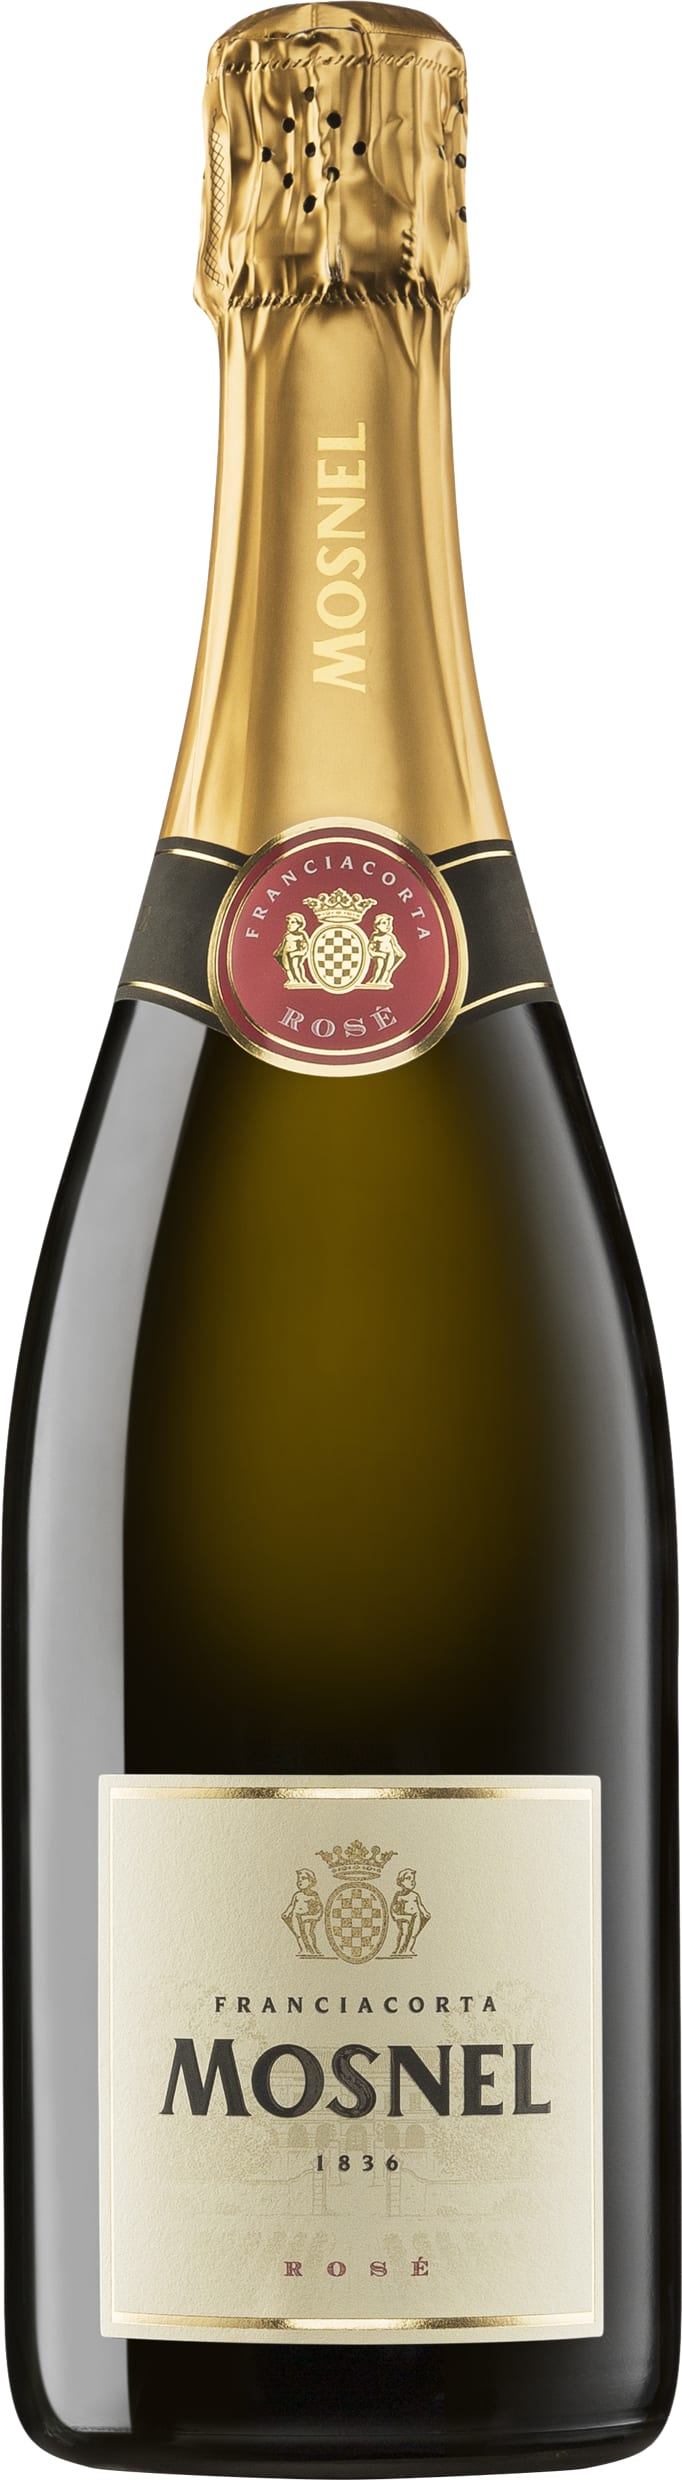 Mosnel Franciacorta Brut Rose 75cl NV - Buy Mosnel Wines from GREAT WINES DIRECT wine shop